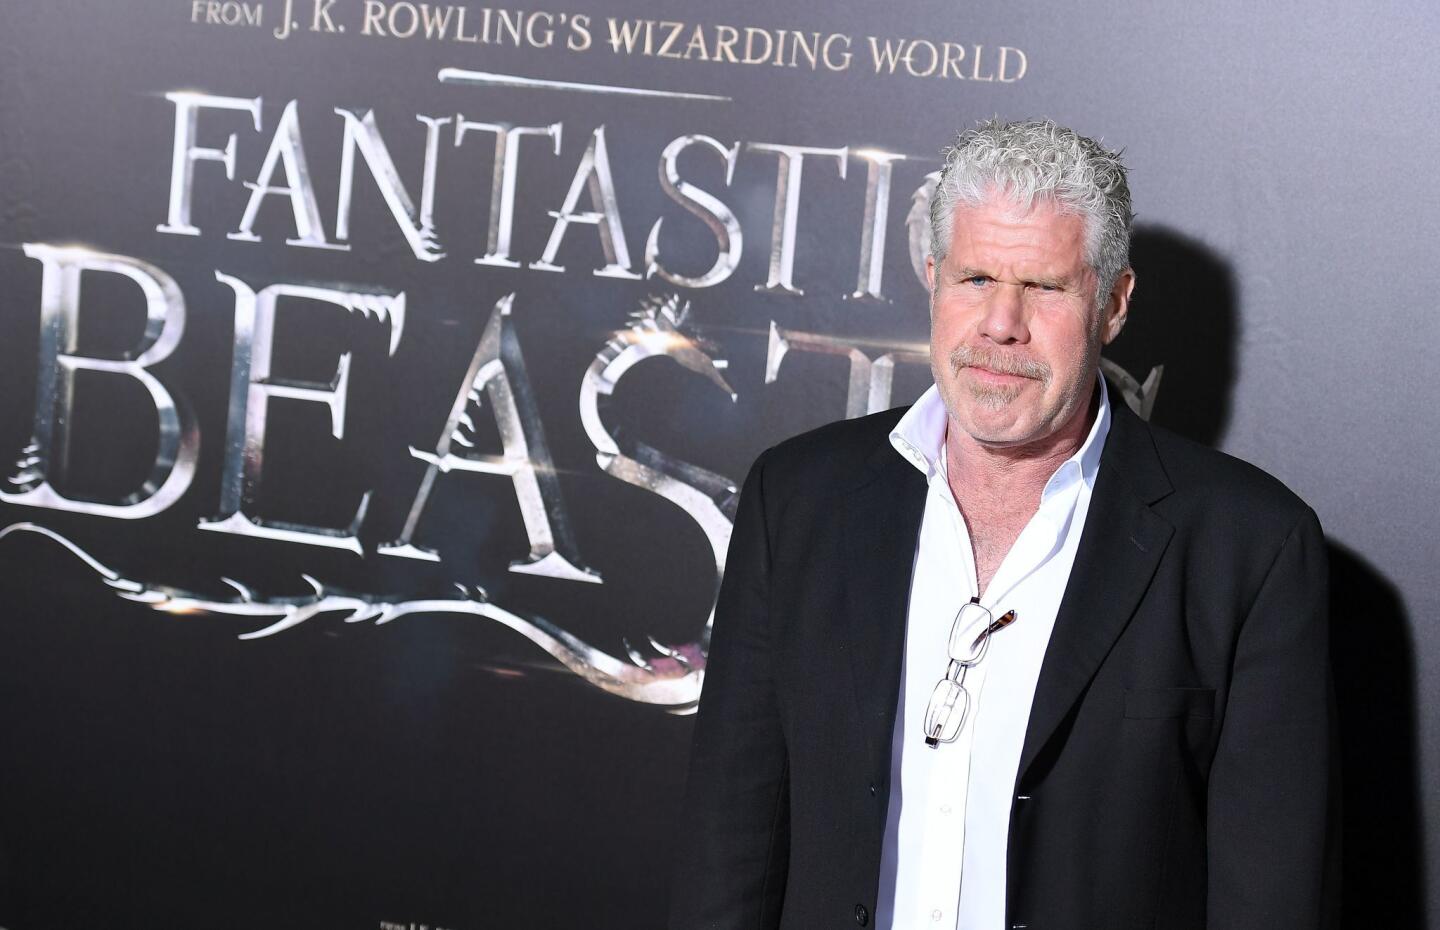 'Fantastic Beasts and Where to Find Them' premiere